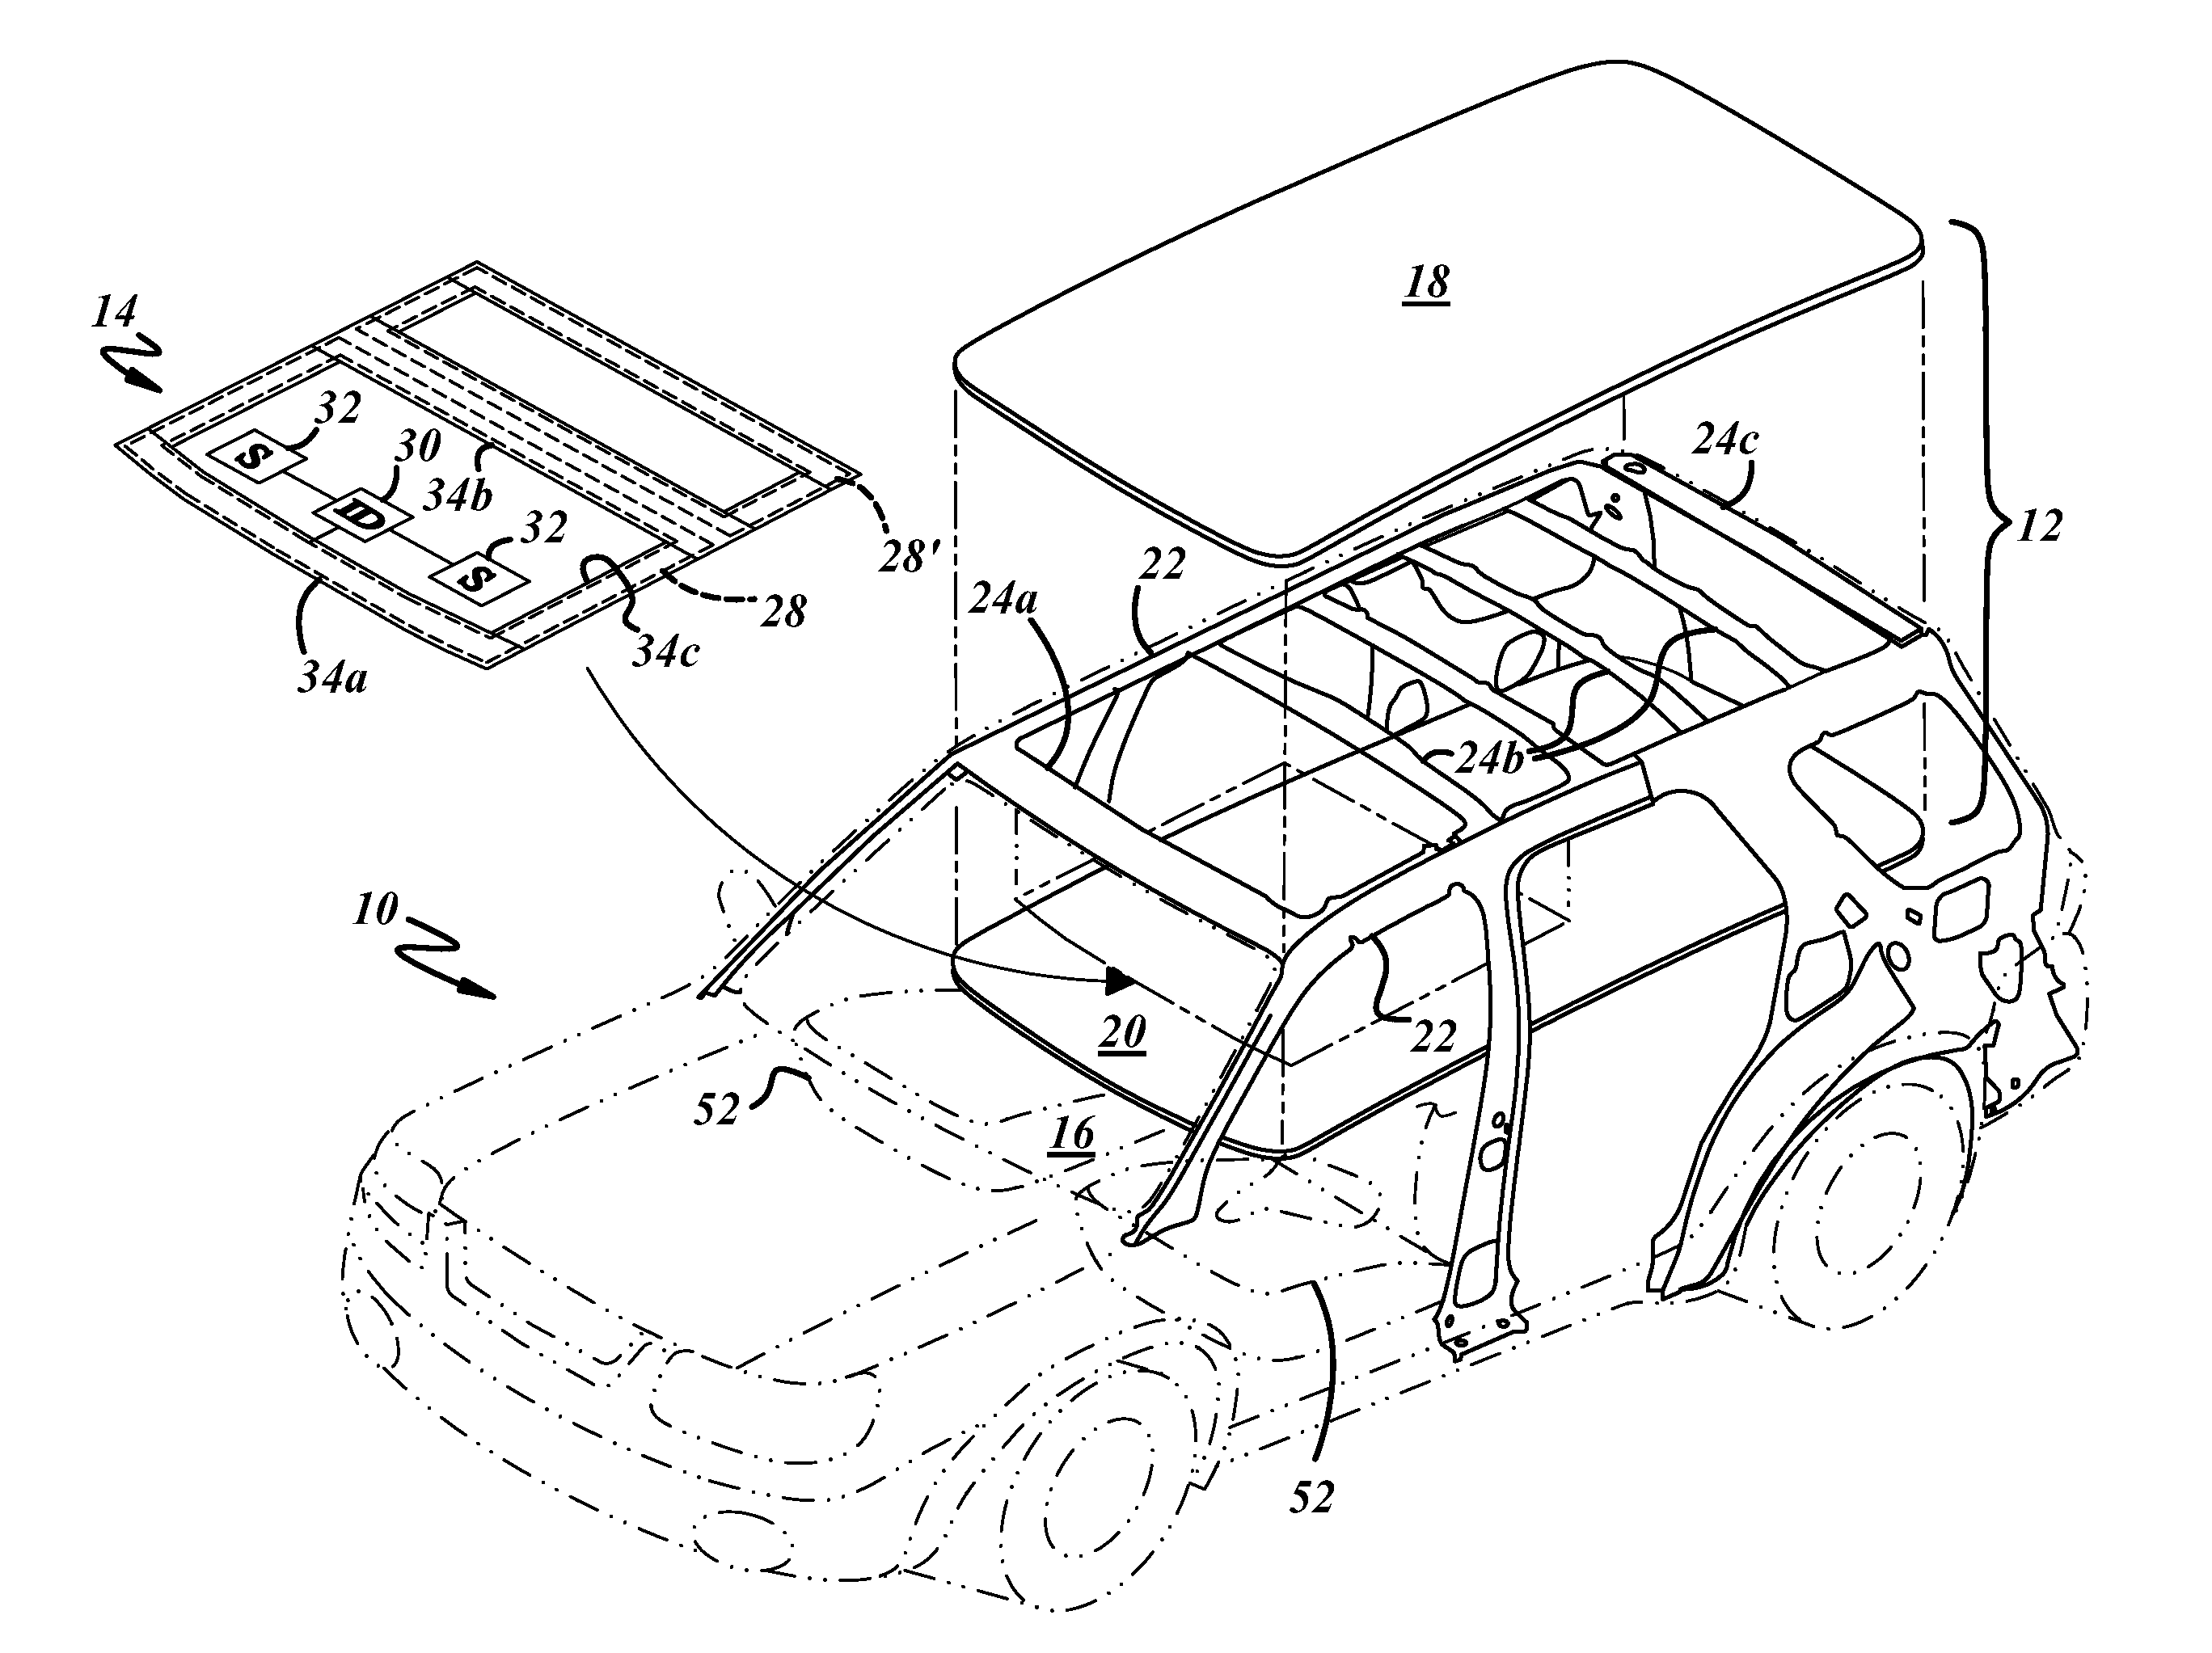 Pneumatically reinforced vehicle body structure